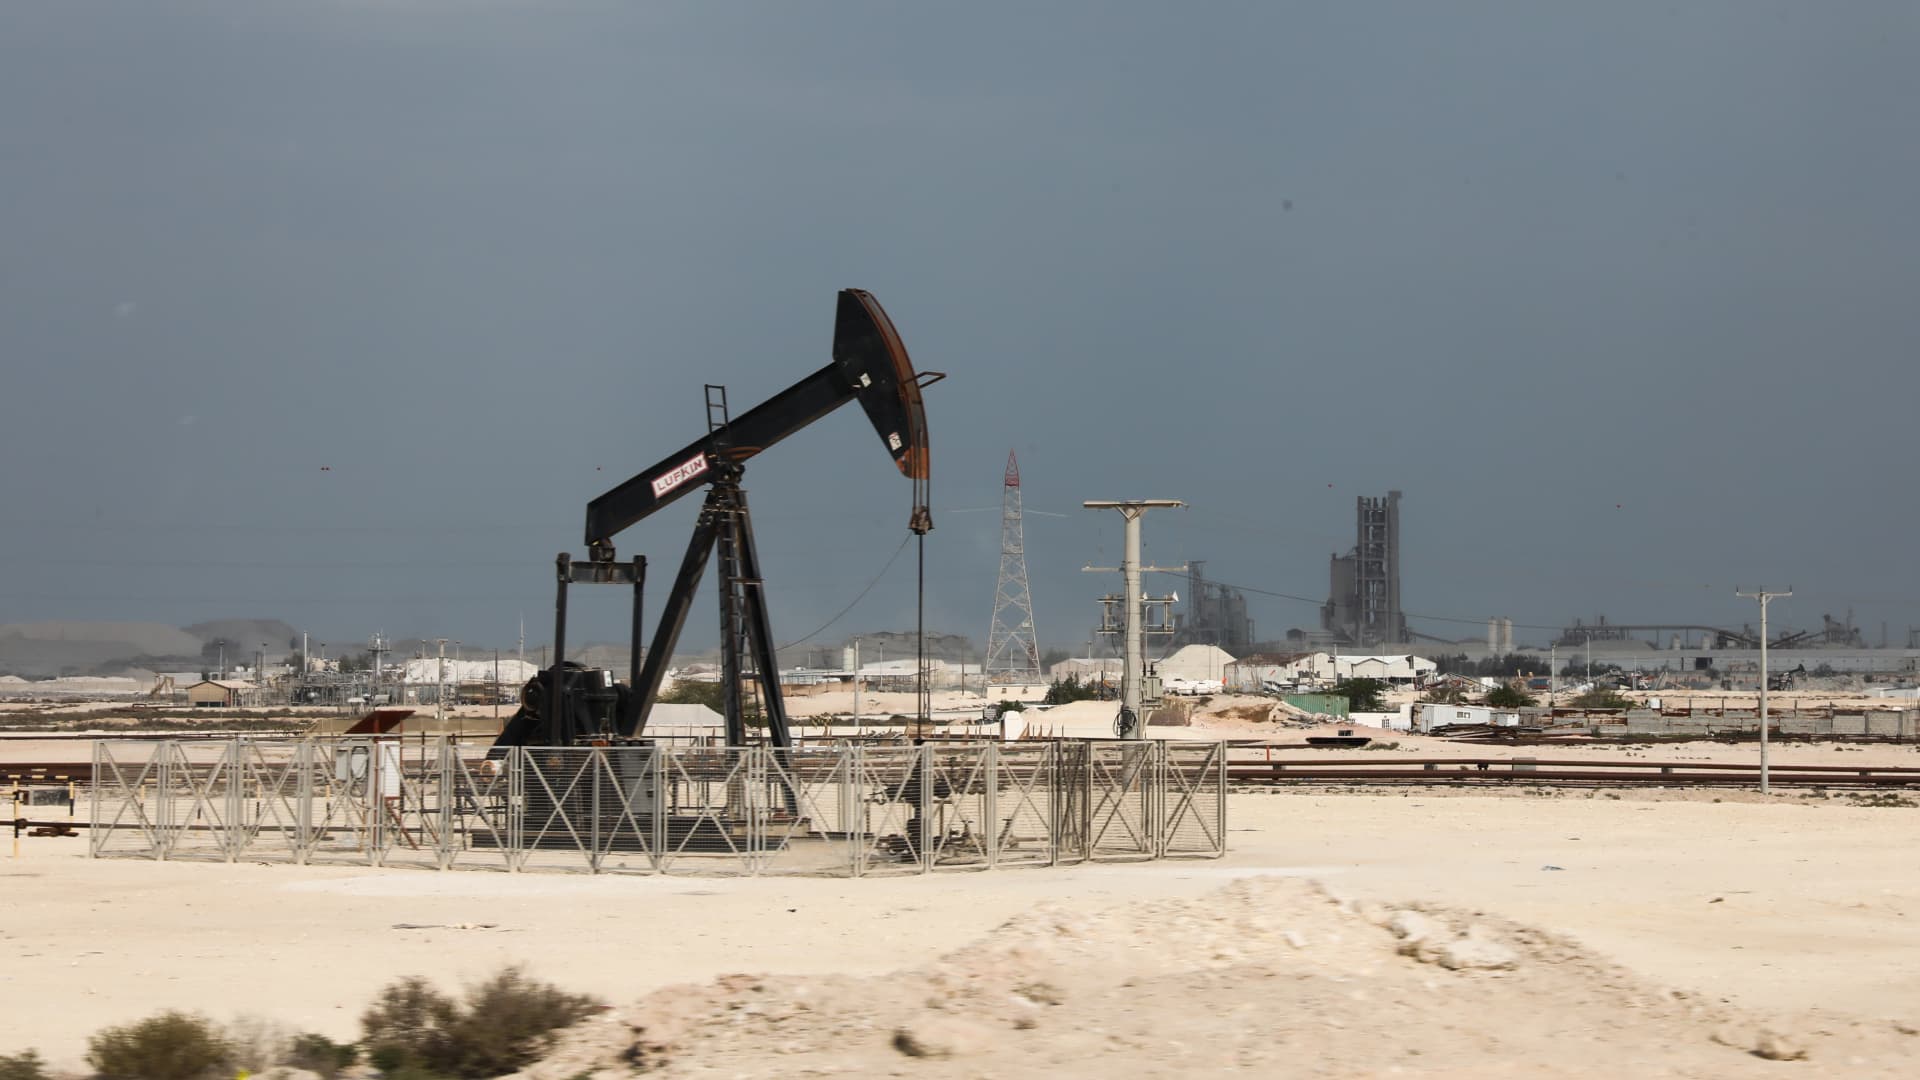 Oil strategist says the market could be caught off guard by a crude spike this summer